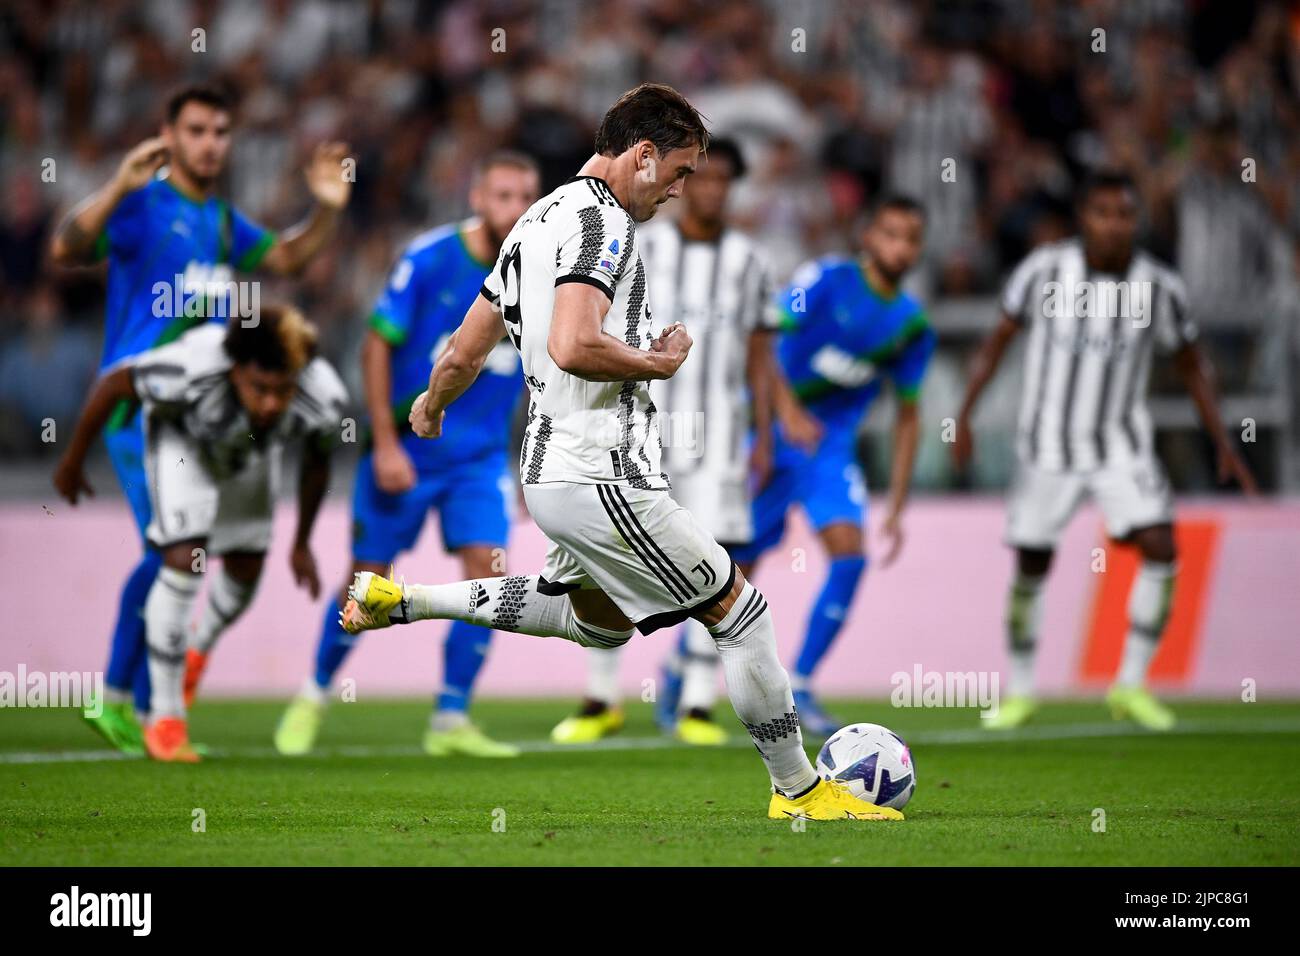 Turin, Italy. 15 August 2022. Dusan Vlahovic of Juventus FC scores a goal from a penalty kick during the Serie A football match between Juventus FC and US Sassuolo. Credit: Nicolò Campo/Alamy Live News Stock Photo